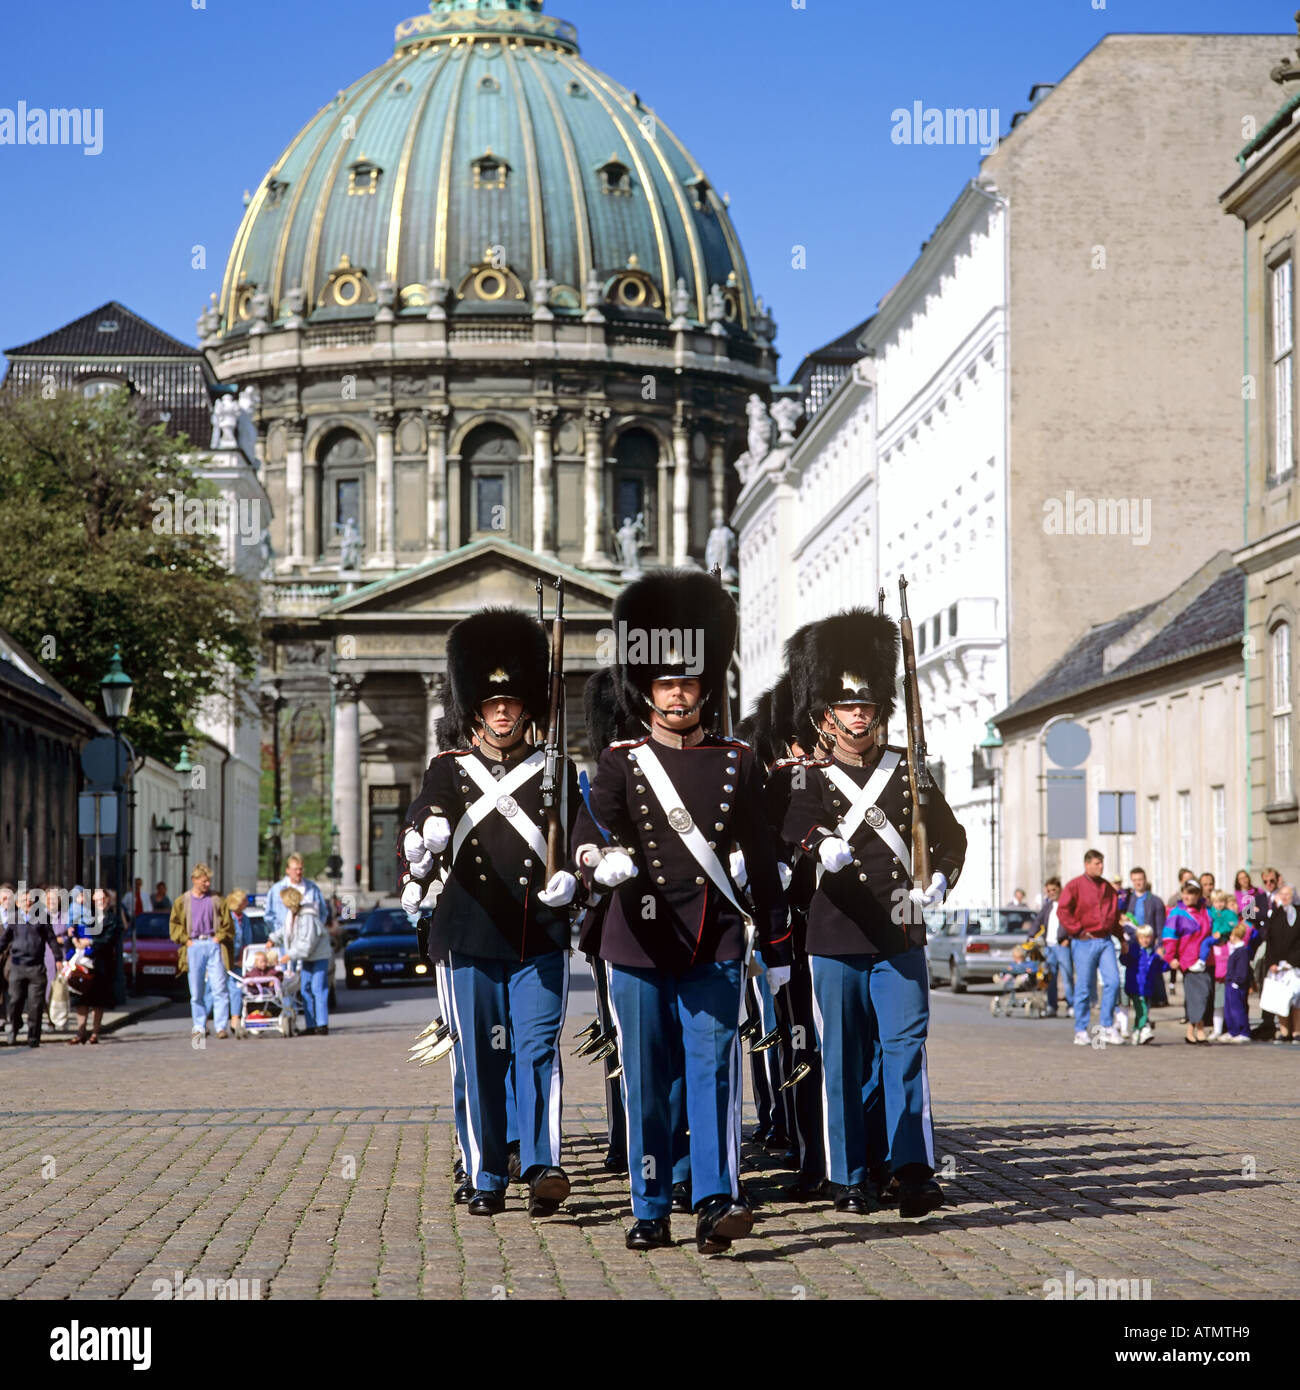 Royal life guards marching in front of Frederik's church, the Marble church, Copenhagen, Denmark Stock Photo